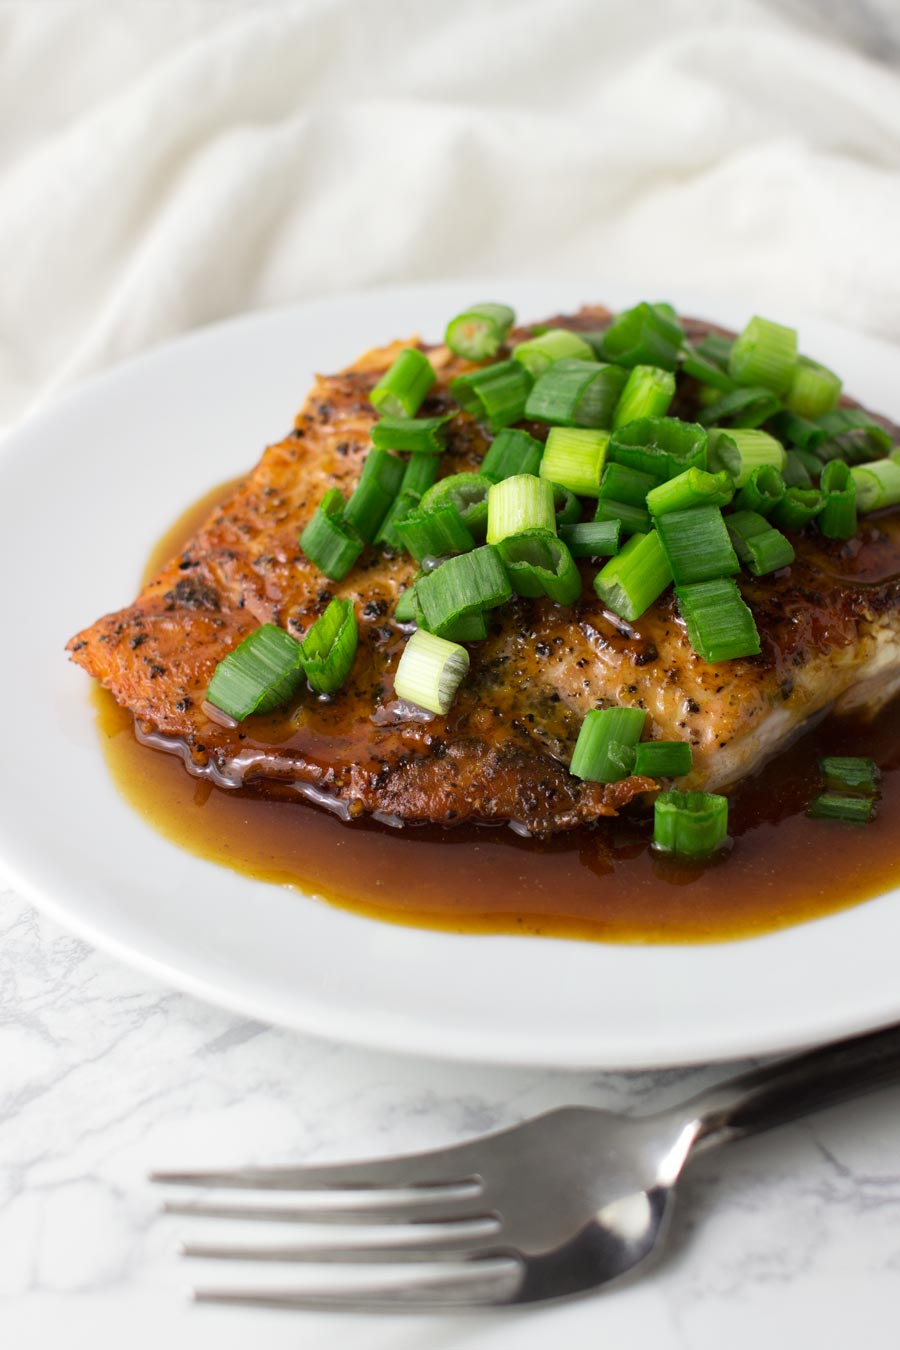 Salmon with Wasabi Sauce recipe from acleanplate.com #paleo #aip #glutenfree